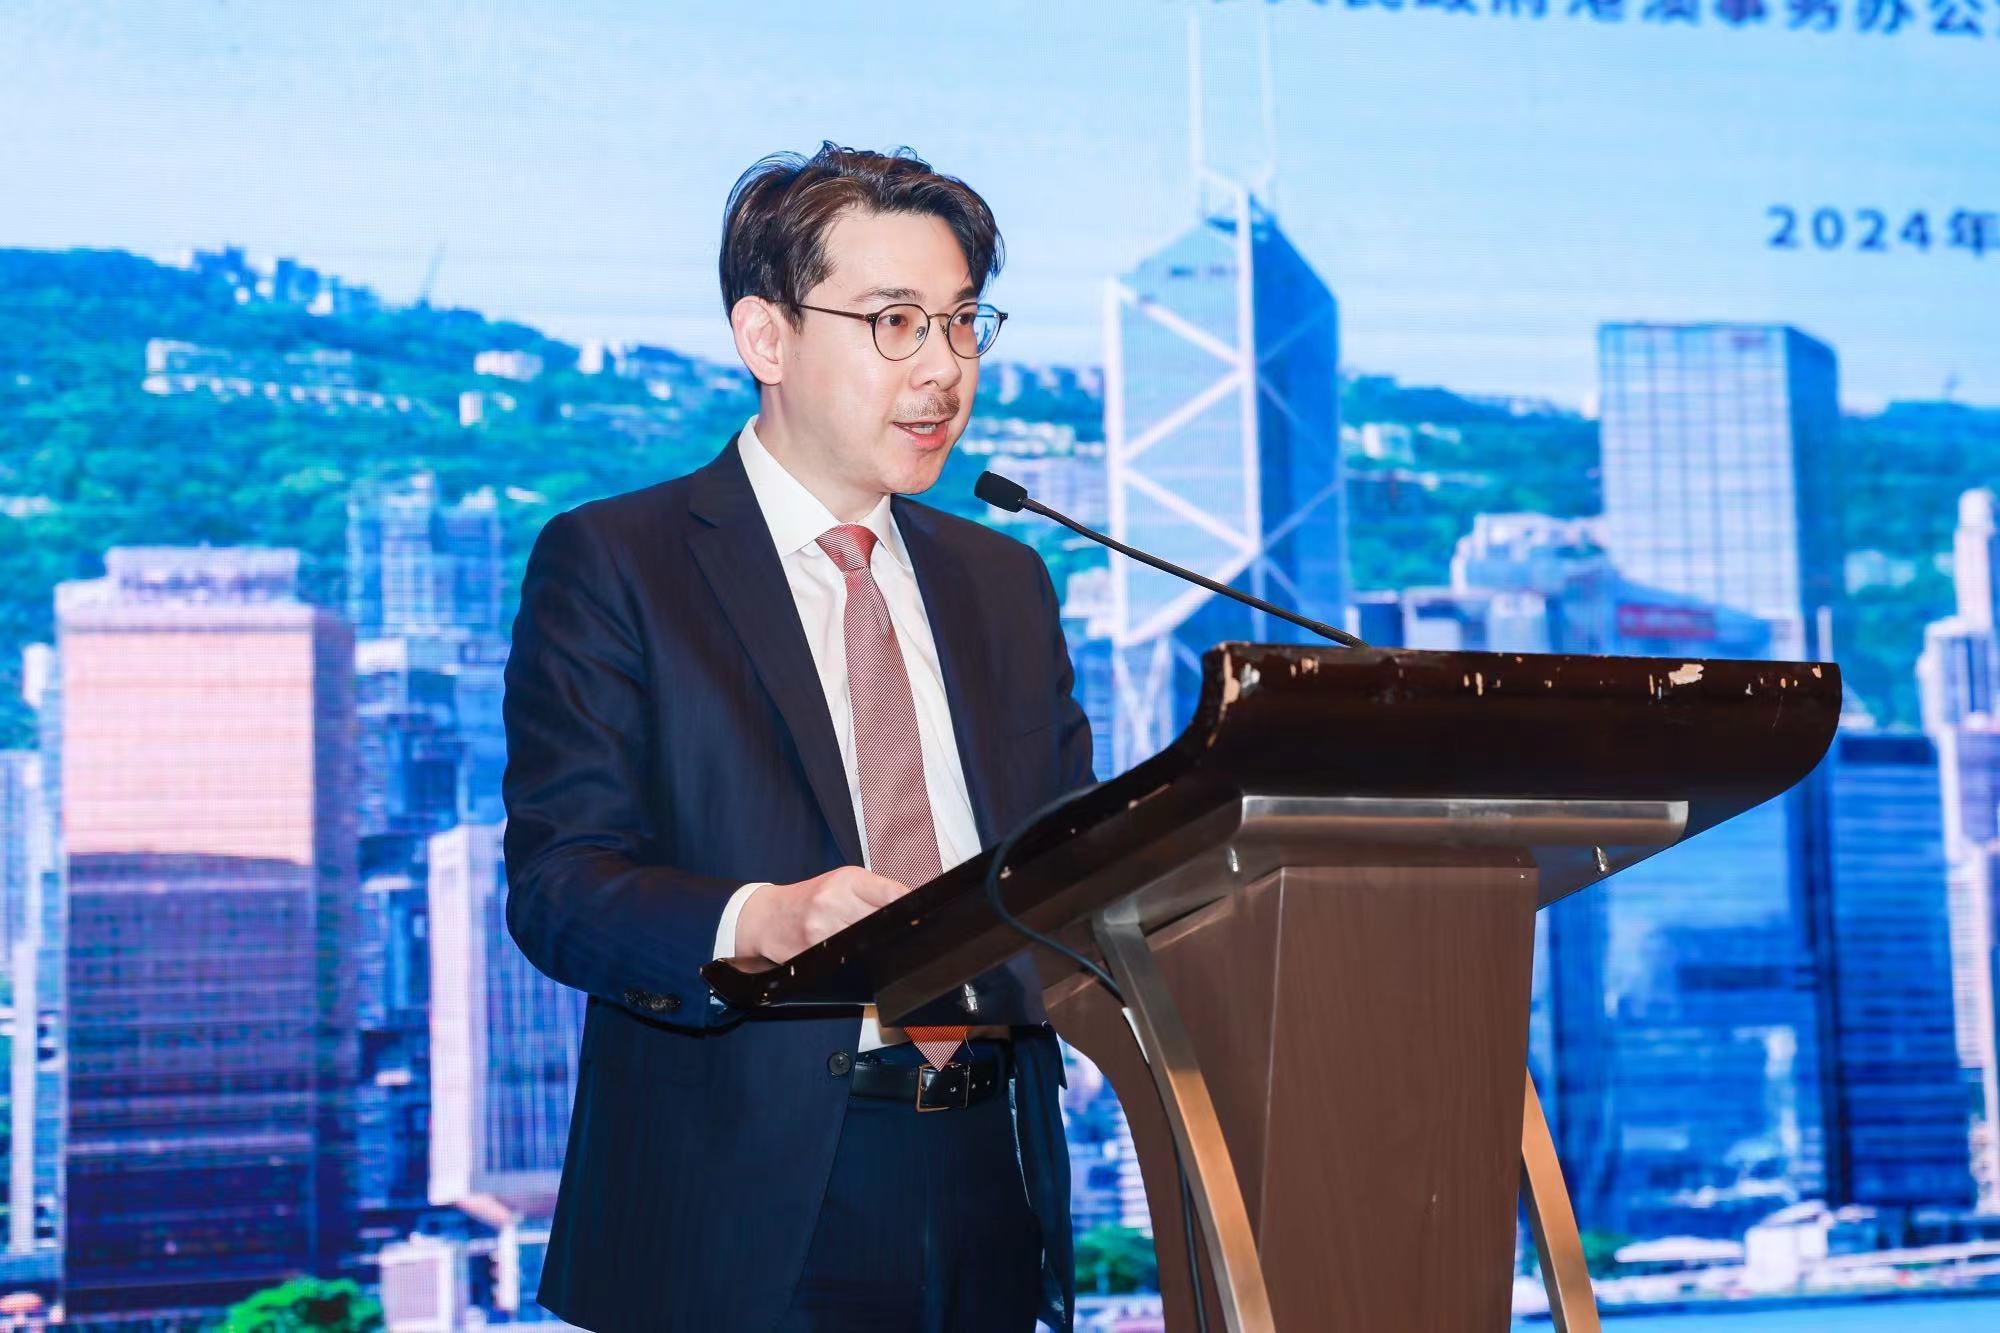 Invest Hong Kong and the Administrative Committee of Wuhan East Lake High-Tech Development Zone co-hosted a seminar in Wuhan, Hubei Province, today (March 21), encouraging local high-tech enterprises to make full use of Hong Kong's business advantages and opportunities in innovation development amid the Belt and Road Initiative and the Guangdong-Hong Kong-Macao Greater Bay Area development to expand overseas. Photo shows the Associate Director-General of Investment Promotion, Dr Jimmy Chiang, delivering welcome remarks at the seminar. 
